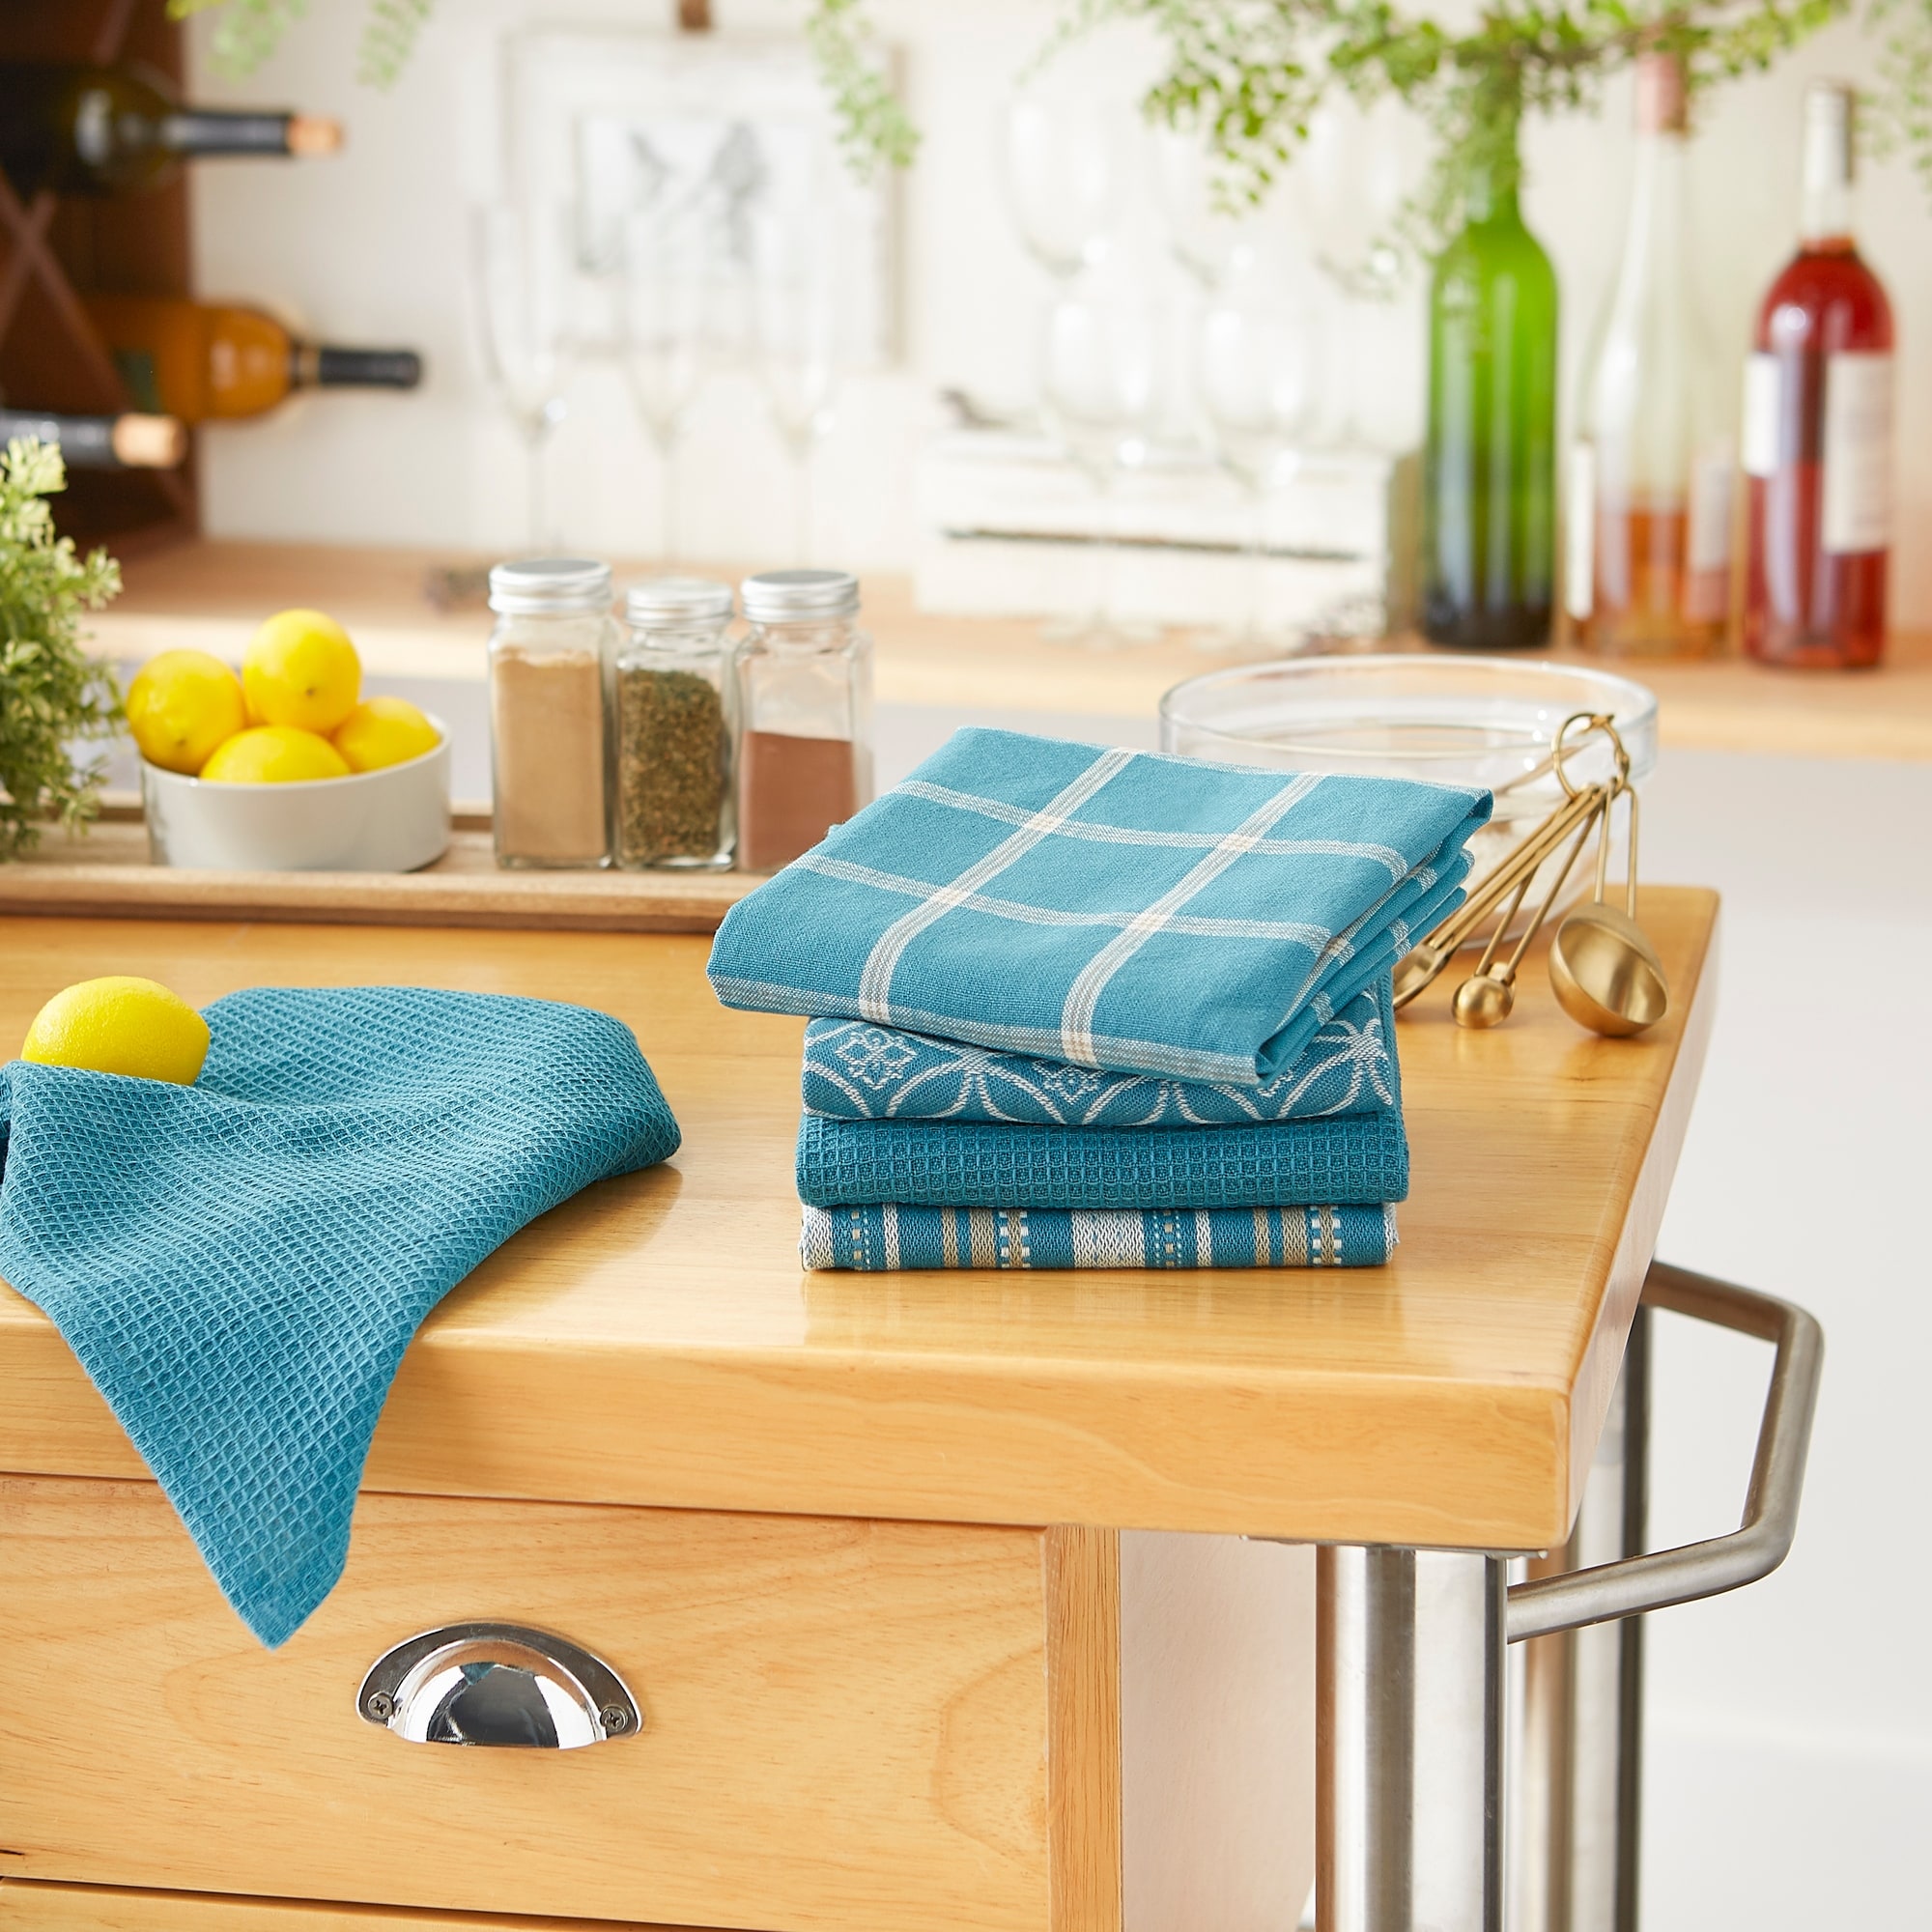 DISH TOWELS FOR KITCHEN: The Top 5 Kitchen Dish Towels You Need in